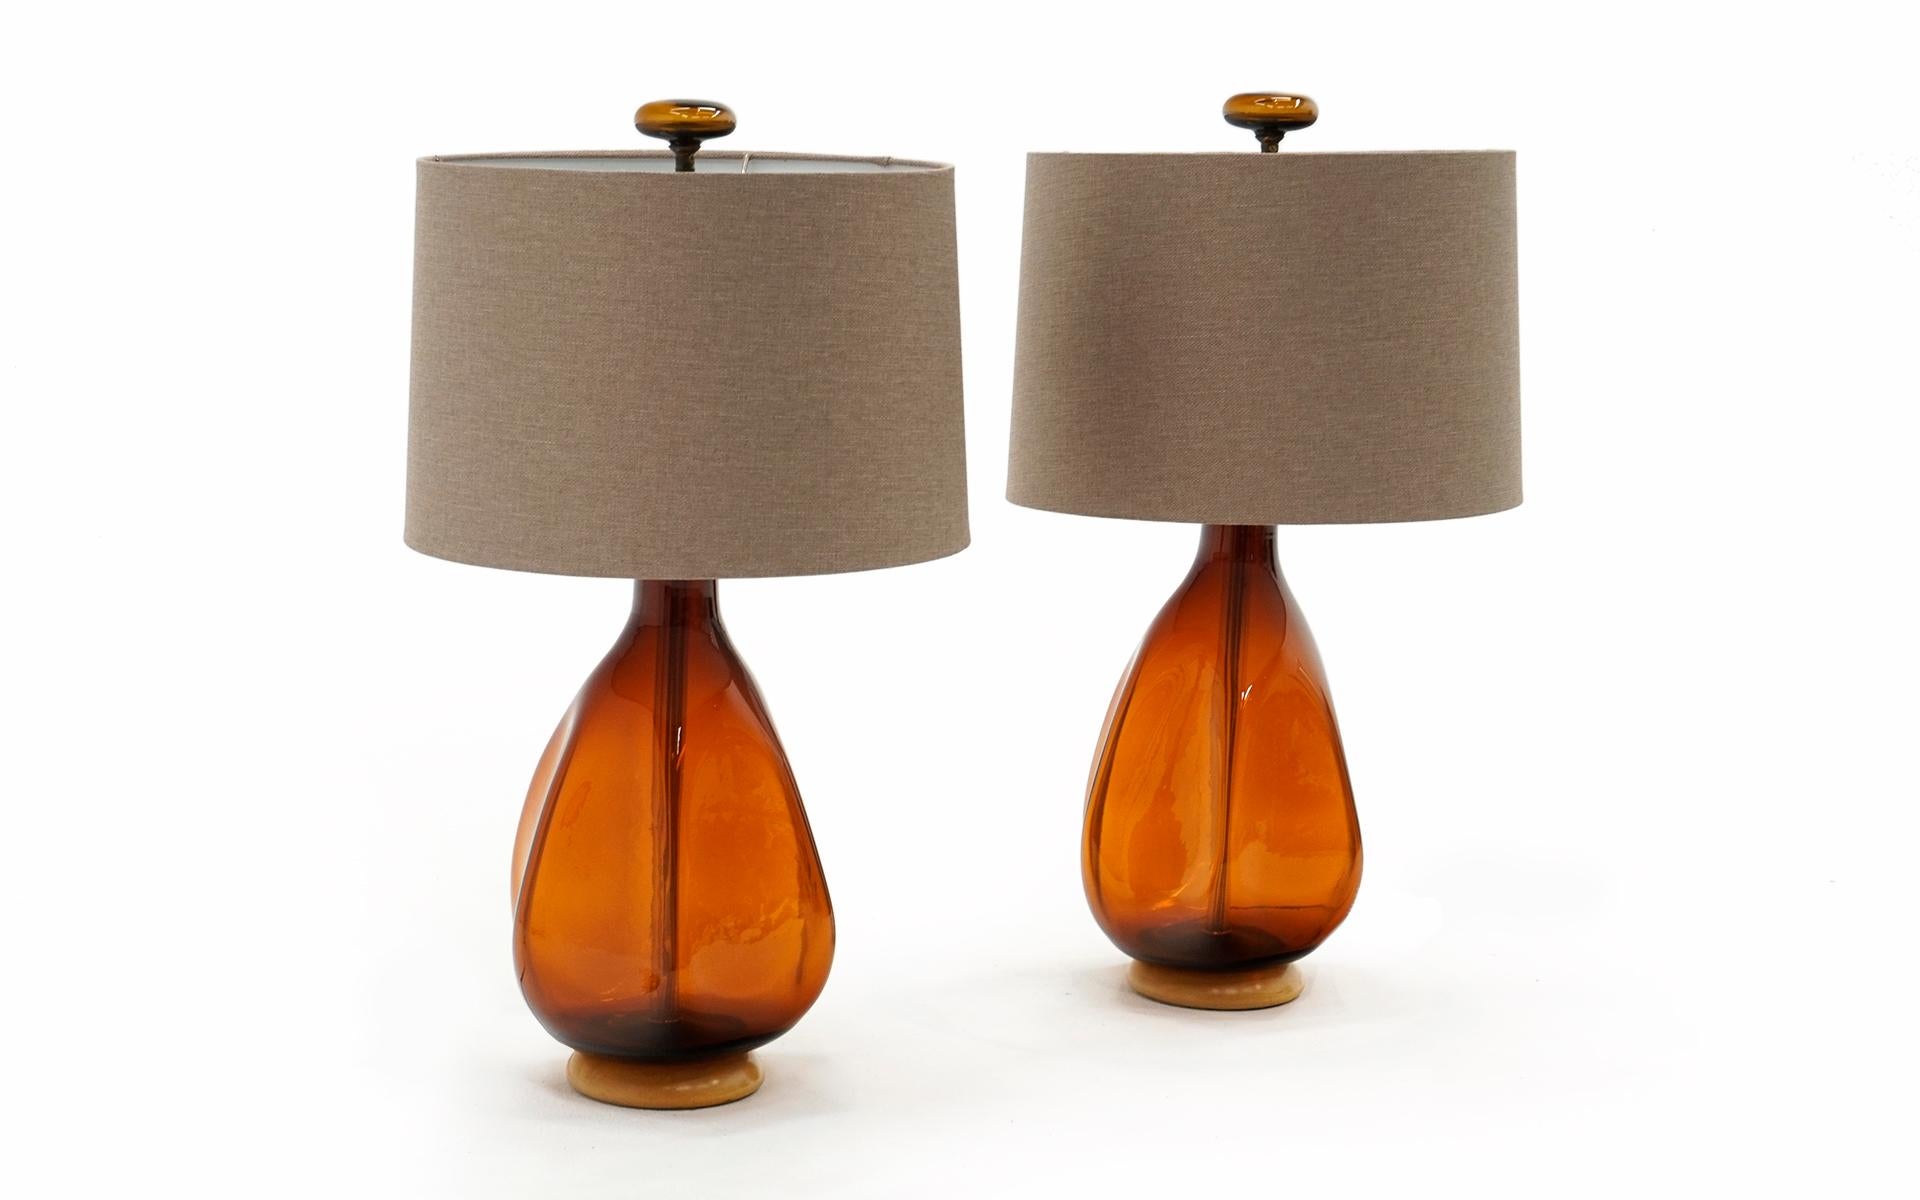 Pair of Art Glass Table Lamps by Blenko American Art Glass, 1950s. Burnt orange / Amber blown glass with blonde wood base and brass harp and fixture. Complete the the original blown glass finials. No Chips, cracks or repairs. Both working and ready